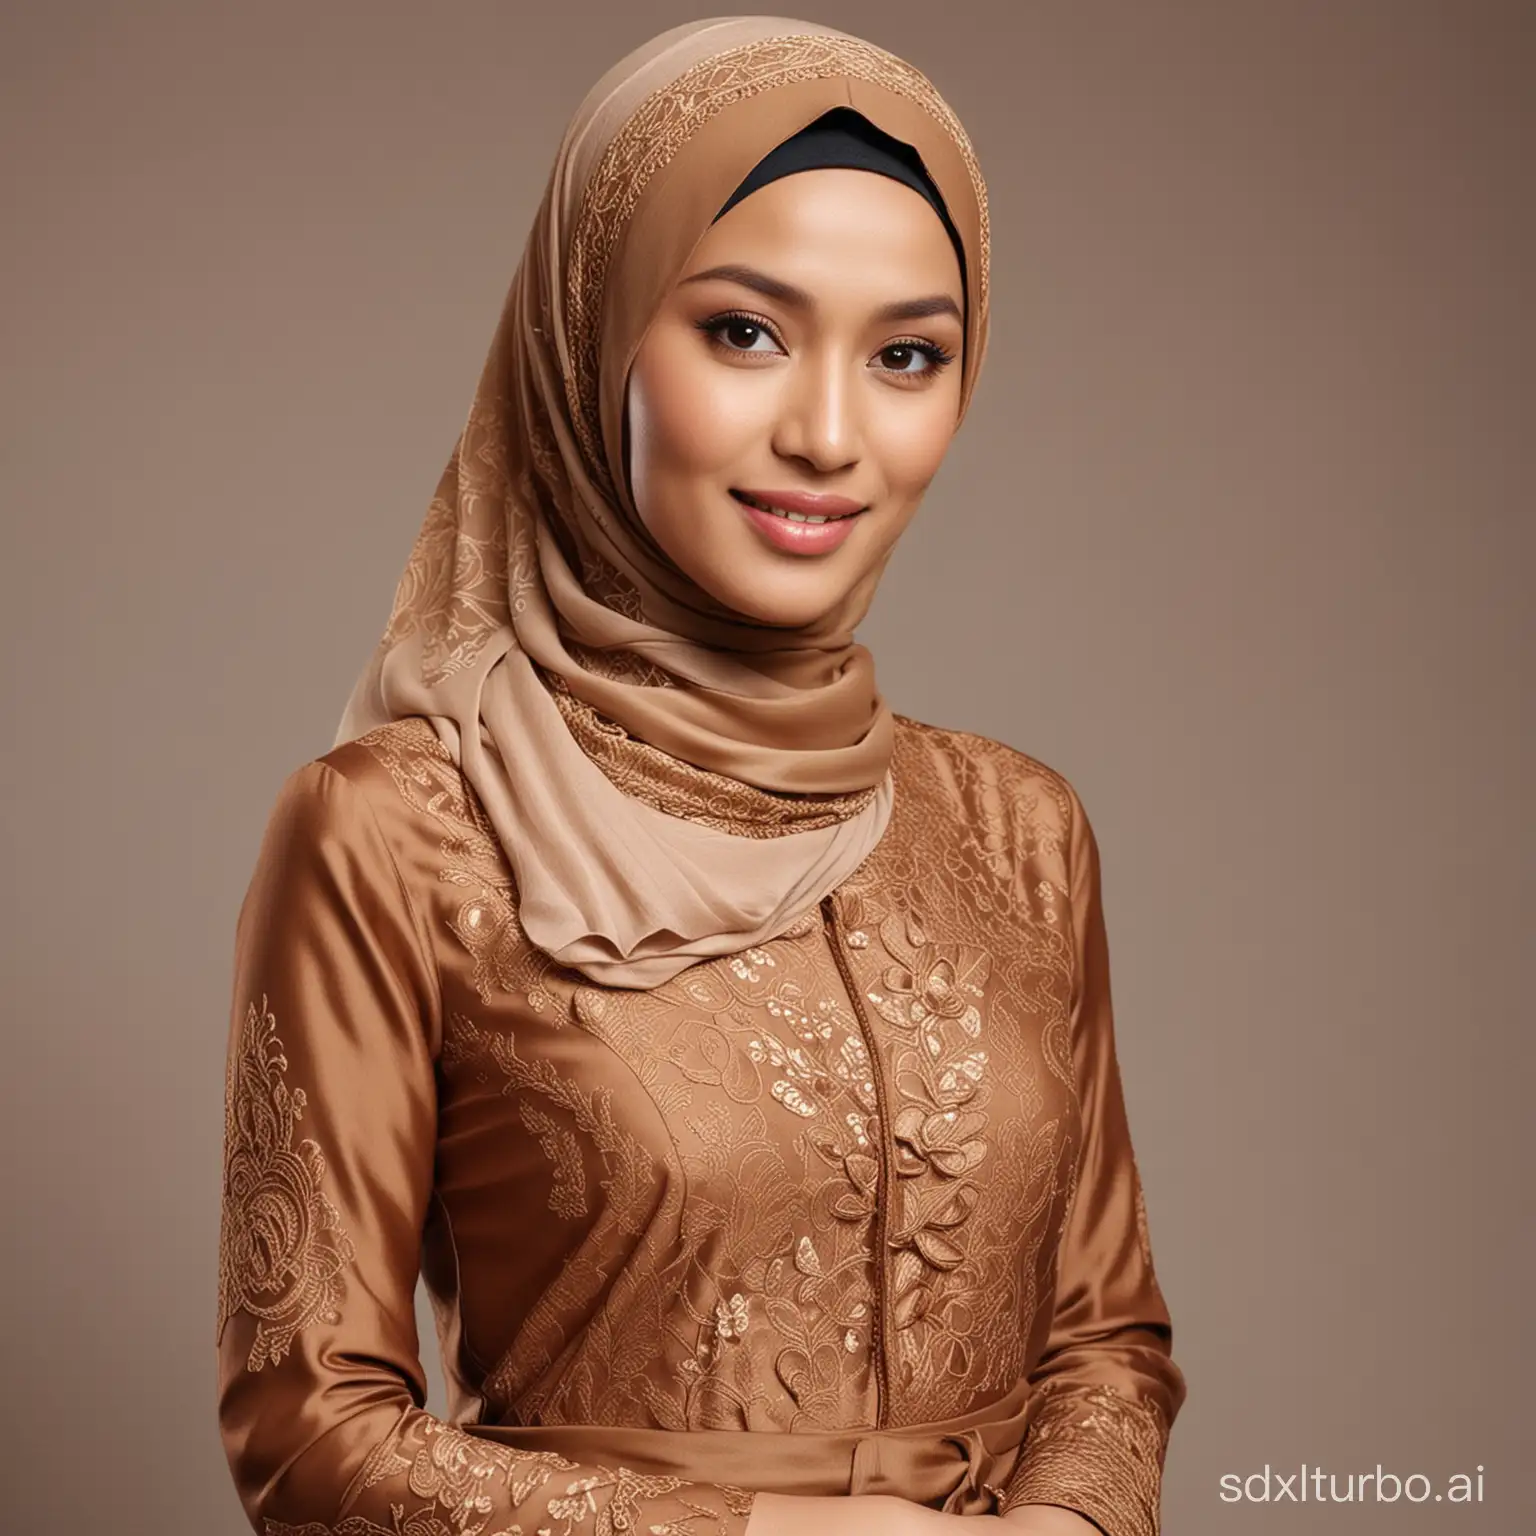 Ra Kartini version with hijab, wearing a milk chocolate-colored kebaya combined with a brown skirt